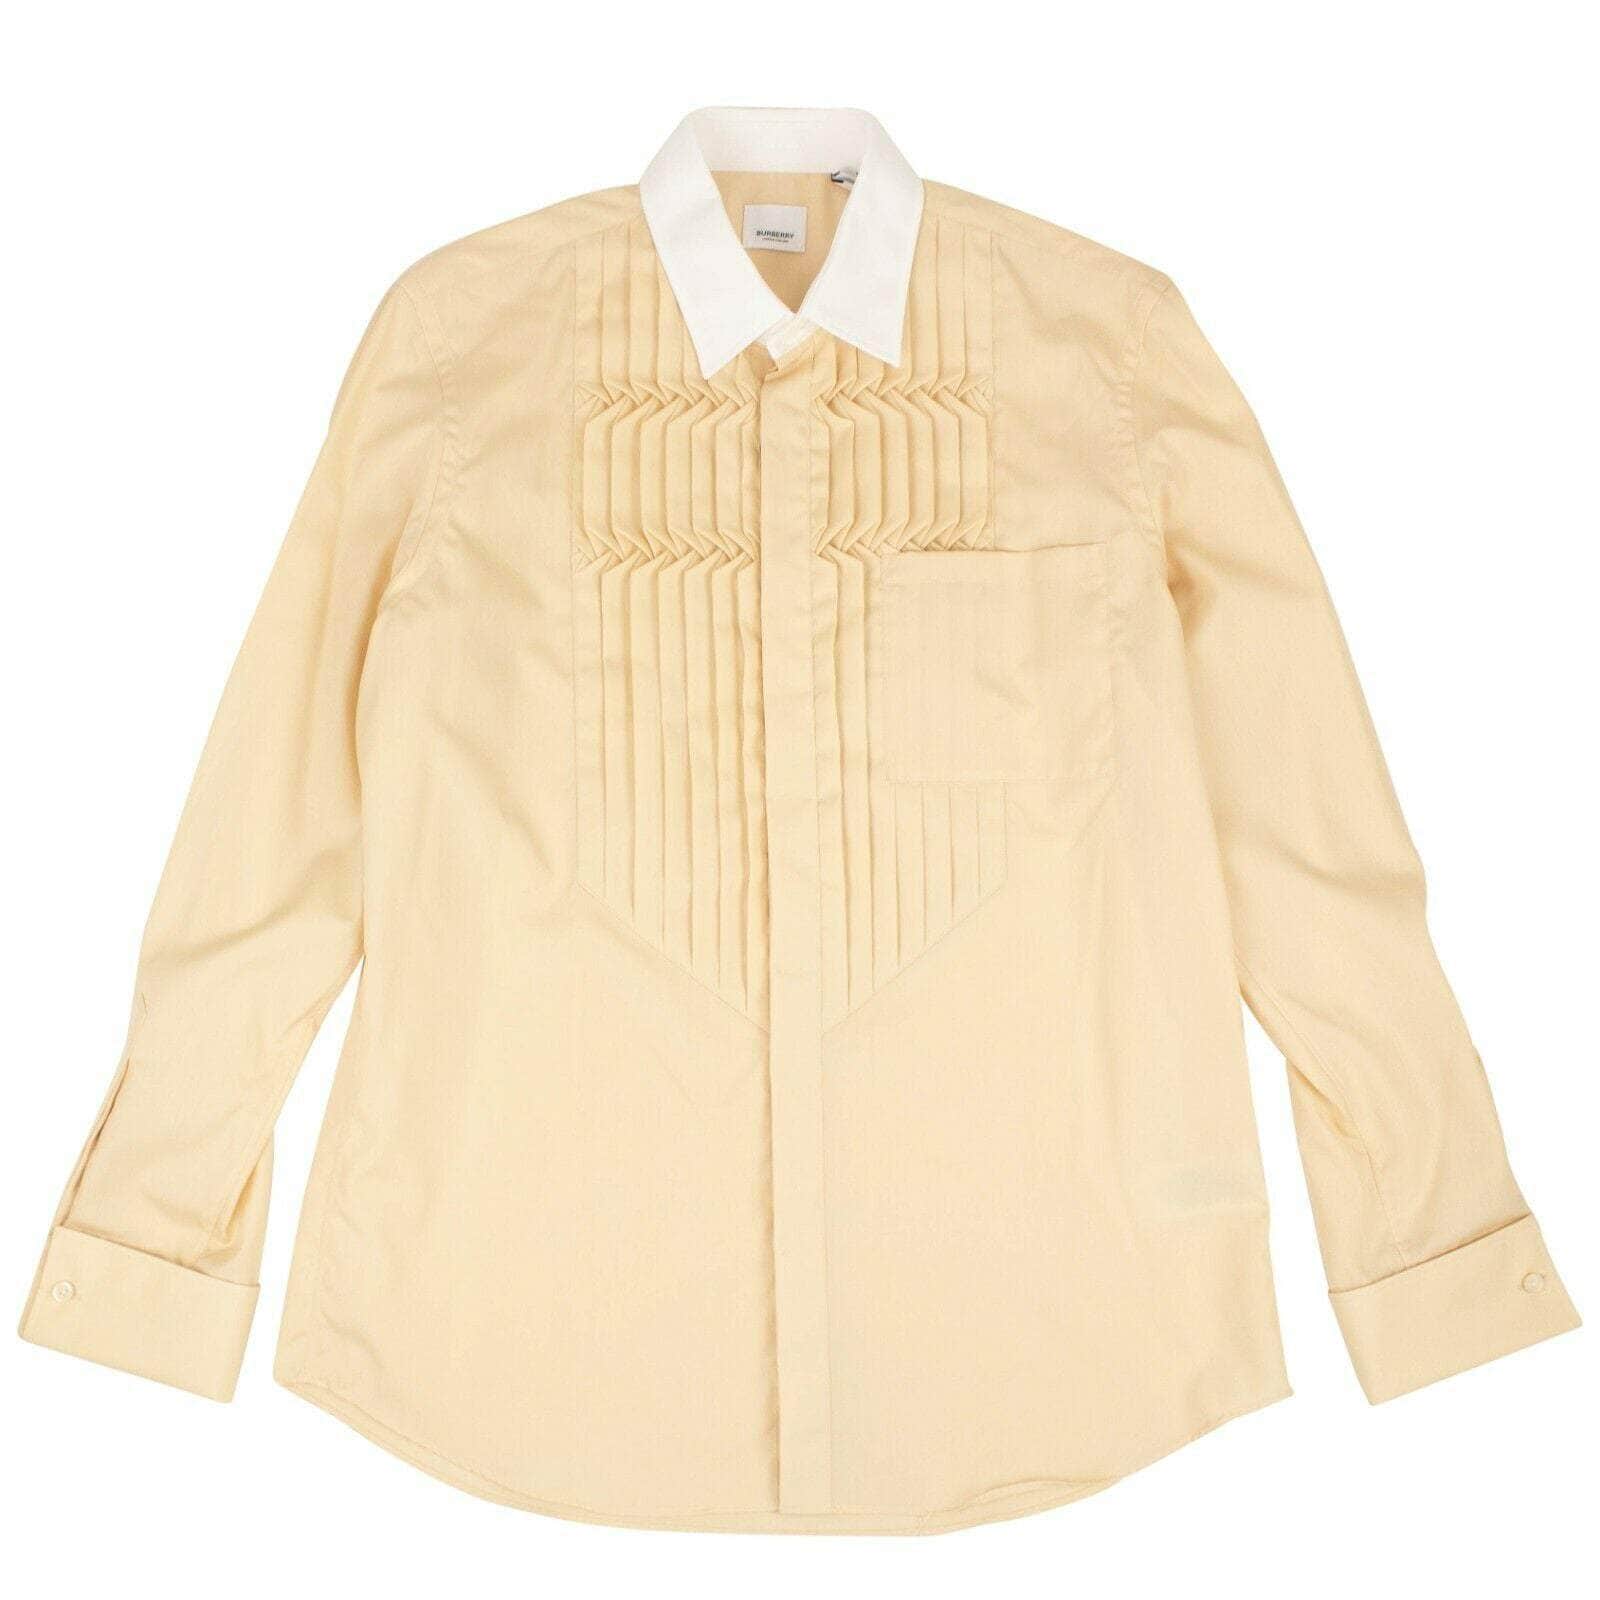 Burberry 1000-2000, burberry, channelenable-all, chicmi, couponcollection, gender-mens, main-clothing, size-38, size-39, size-40, size-41 41 Tan Buttermilk Collar Shirt 95-BRB-1015/41 95-BRB-1015/41